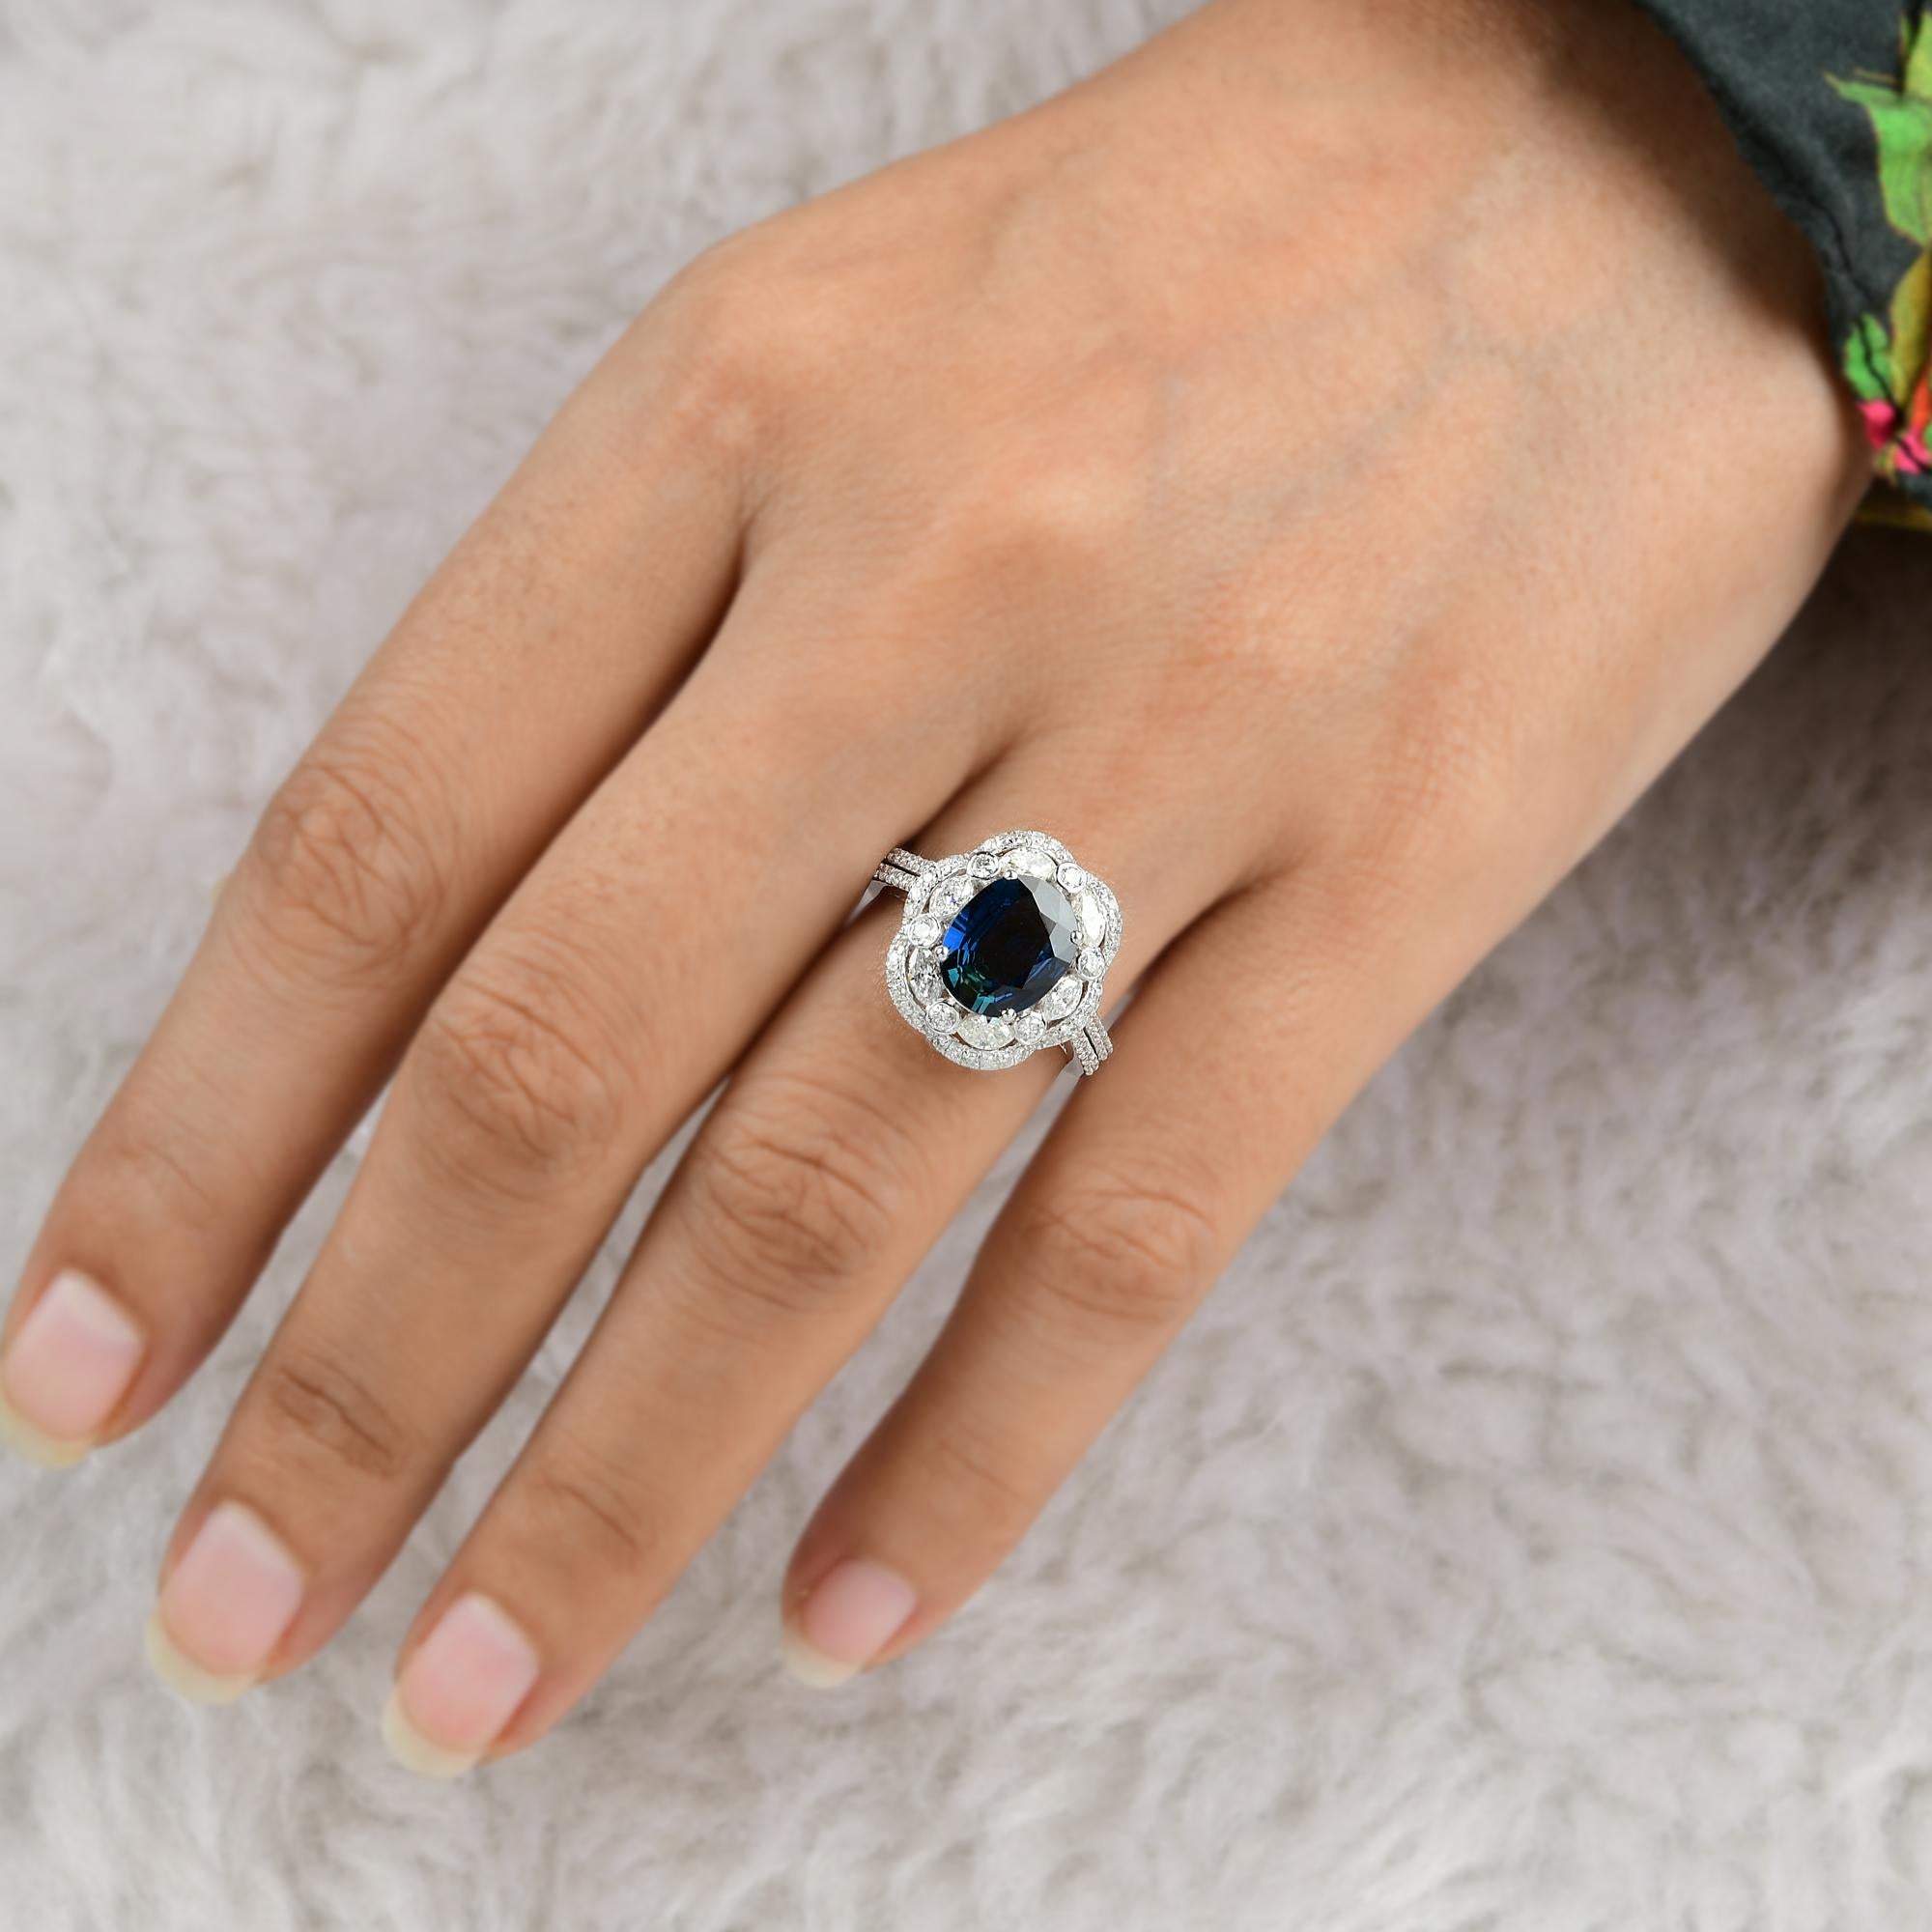 For Sale:  Blue Sapphire Gemstone Cocktail Ring Marquise Diamond 18 Kt White Gold Jewelry 3